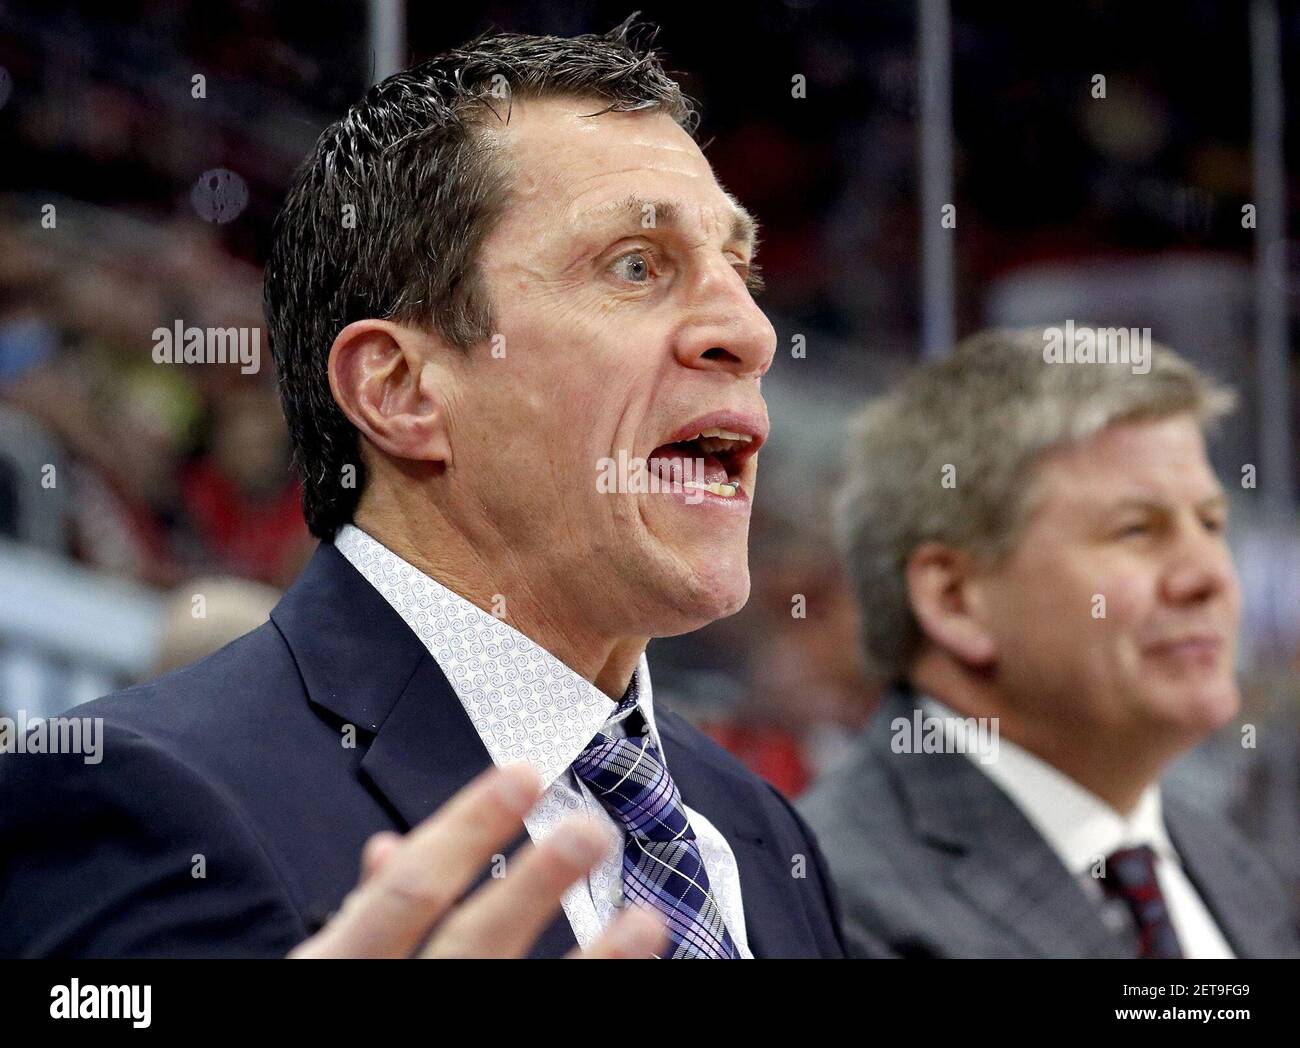 In a March 2018 file image, Carolina Hurricanes coach Rod Brind'Amour, left, argues a ruling in action against the Arizona Coyotes at PNC Arena in Raleigh, N.C. On Tuesday, Dec. 31, 2019, Rod Brind'Amour's Hurricanes topped the Montreal Canadiens, 3-1. (Chris Seward/Raleigh News & Observer/TNS) Stock Photo